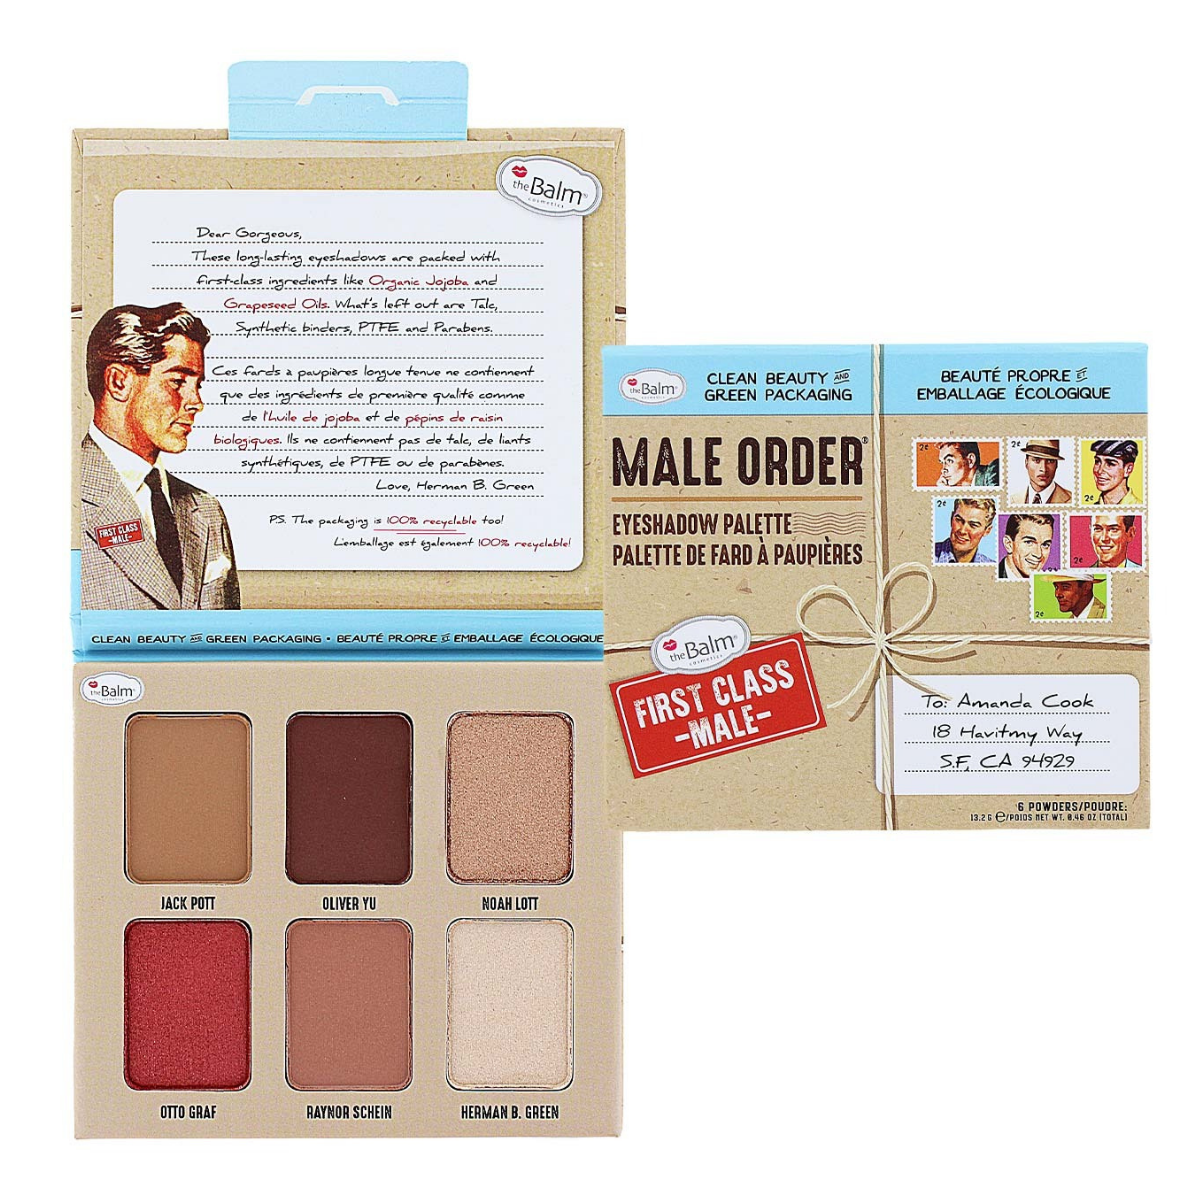 theBalm Male Order Palette - First Class Male.